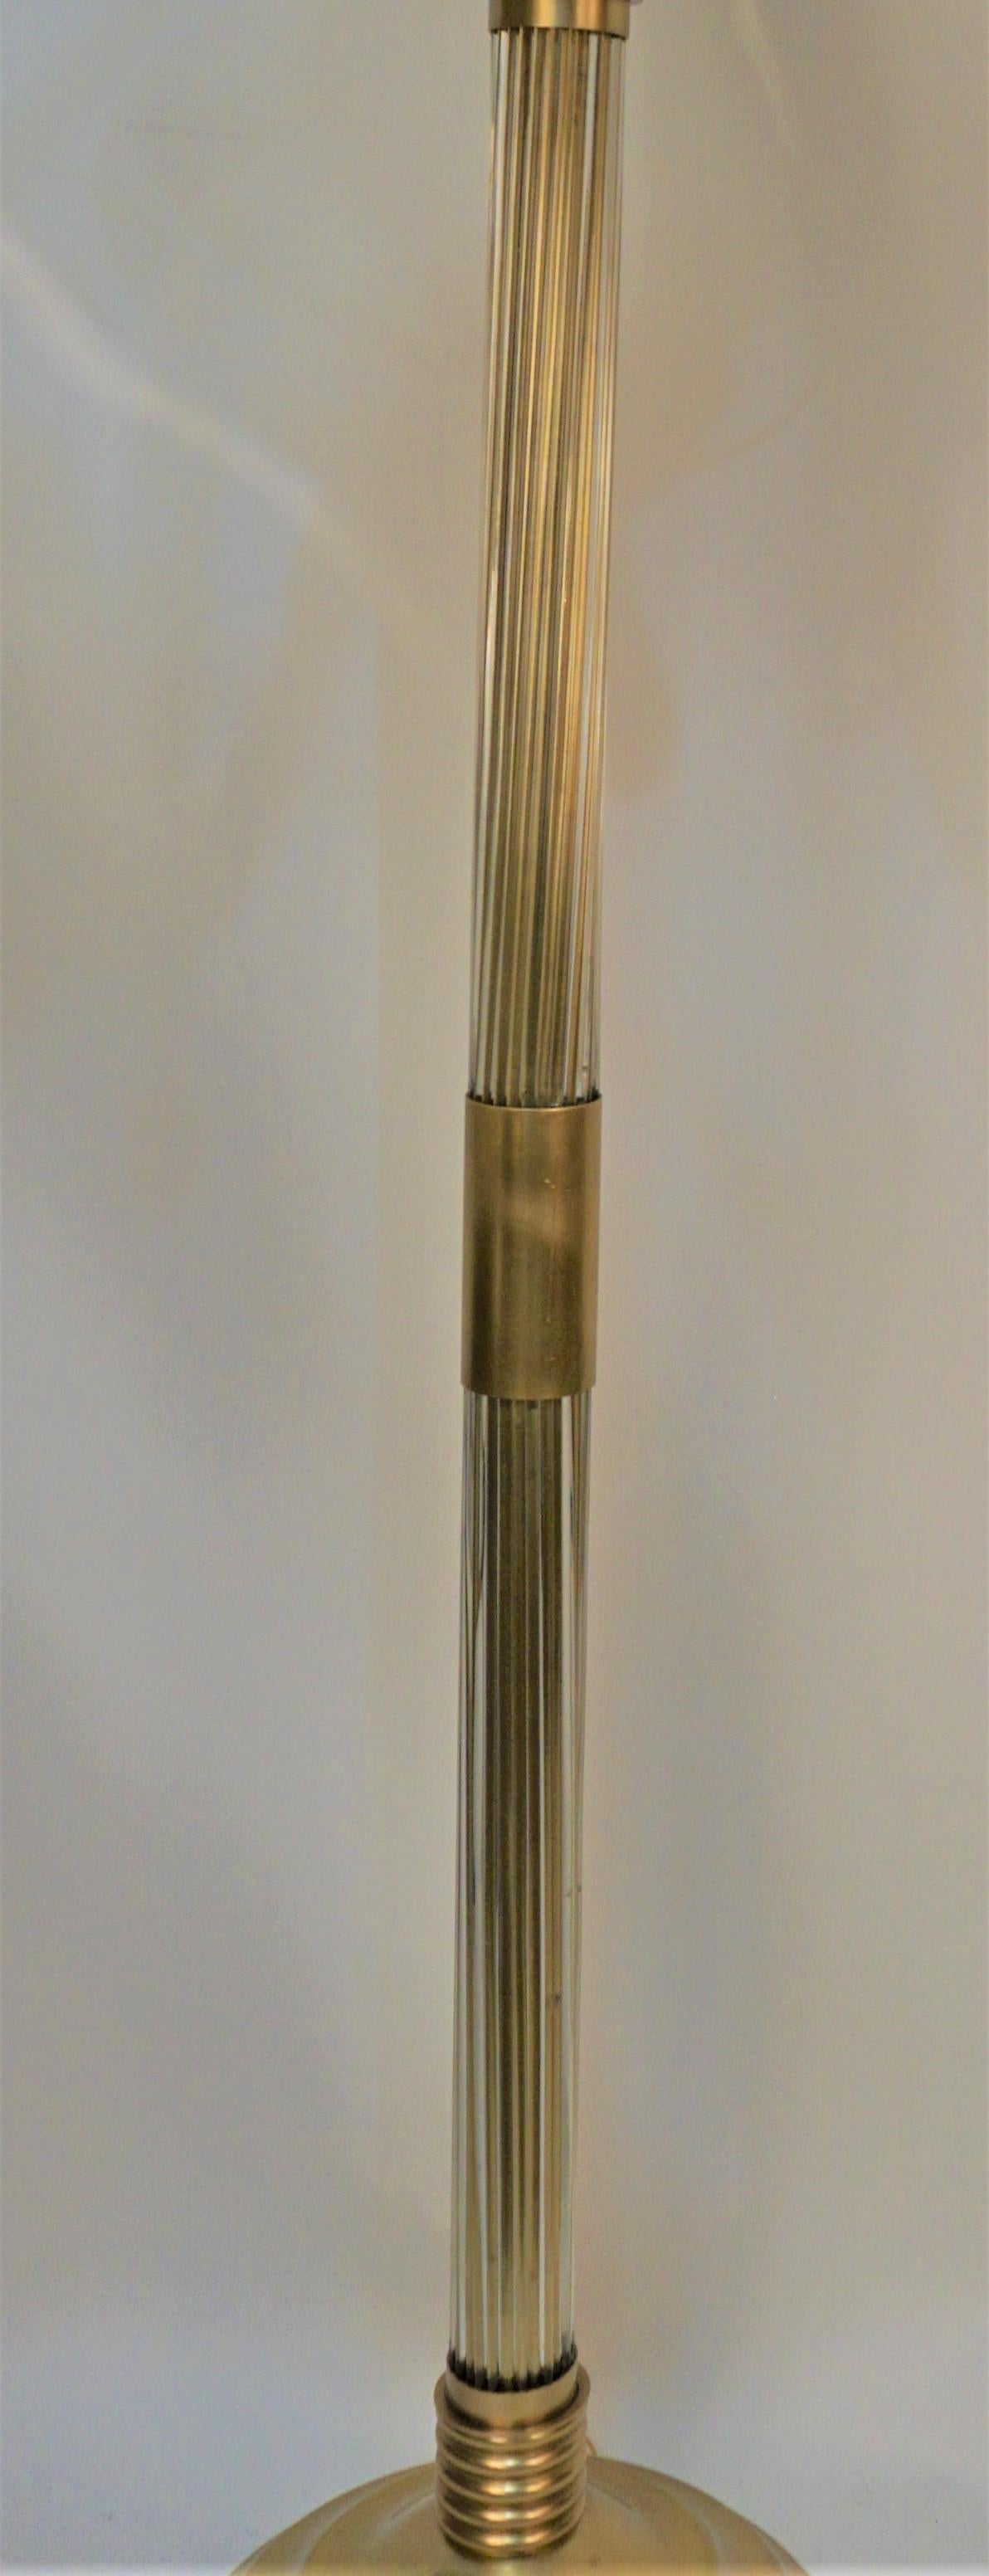 Bronze floor lamp with two set of clear glass rods as center column and four clear glasses extended from upright reflector torchiere shade.
Four lights, 100 watts max each light. 